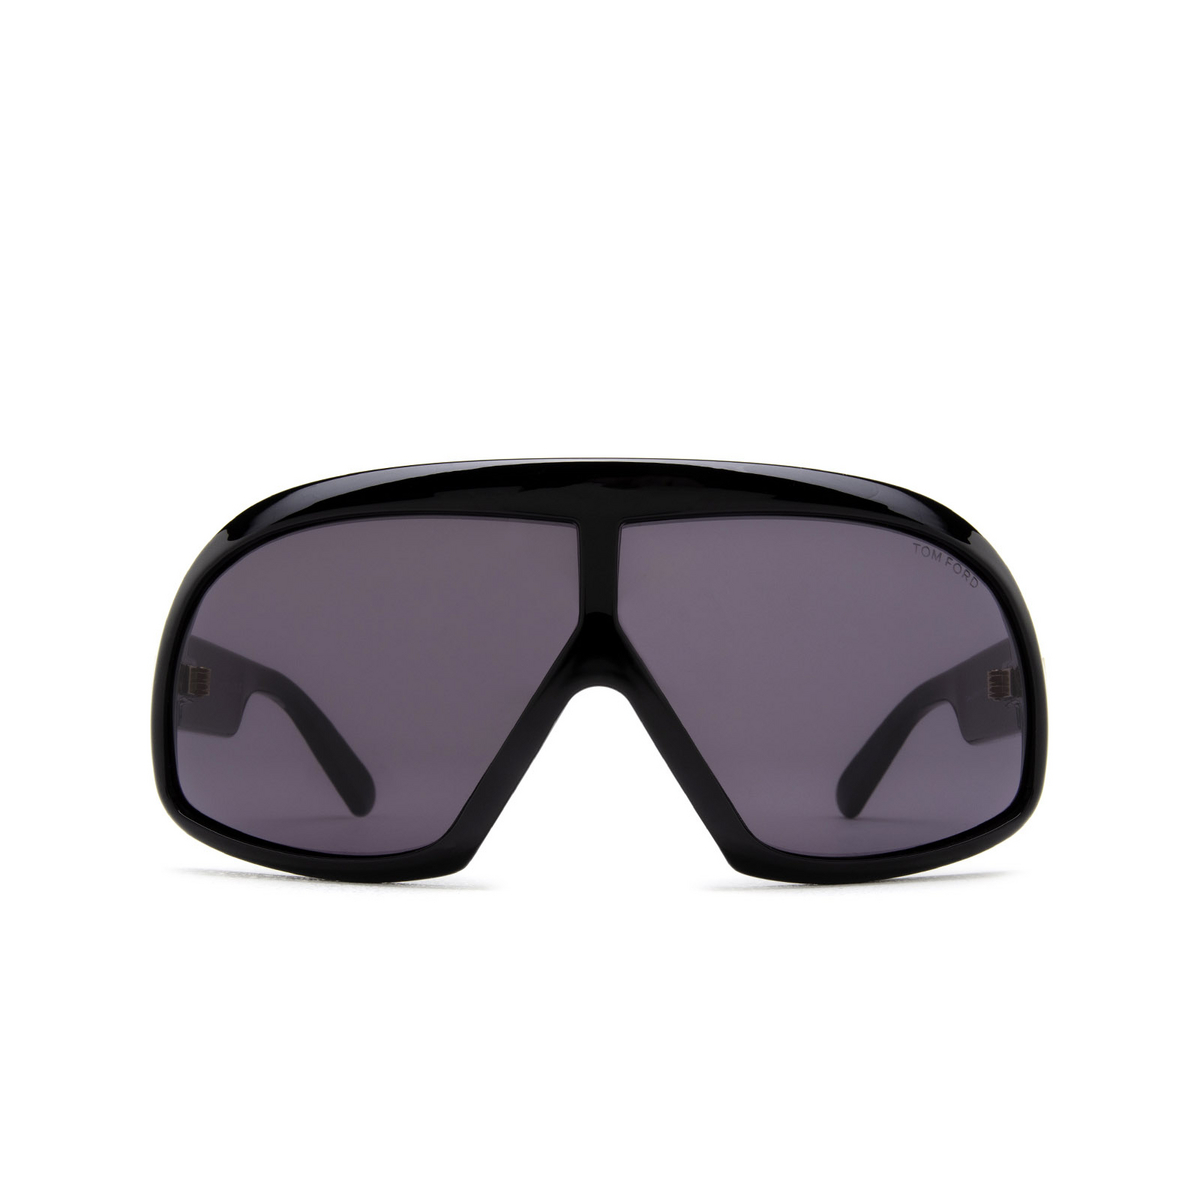 Tom Ford CASSIUS Sunglasses 01A Black - front view